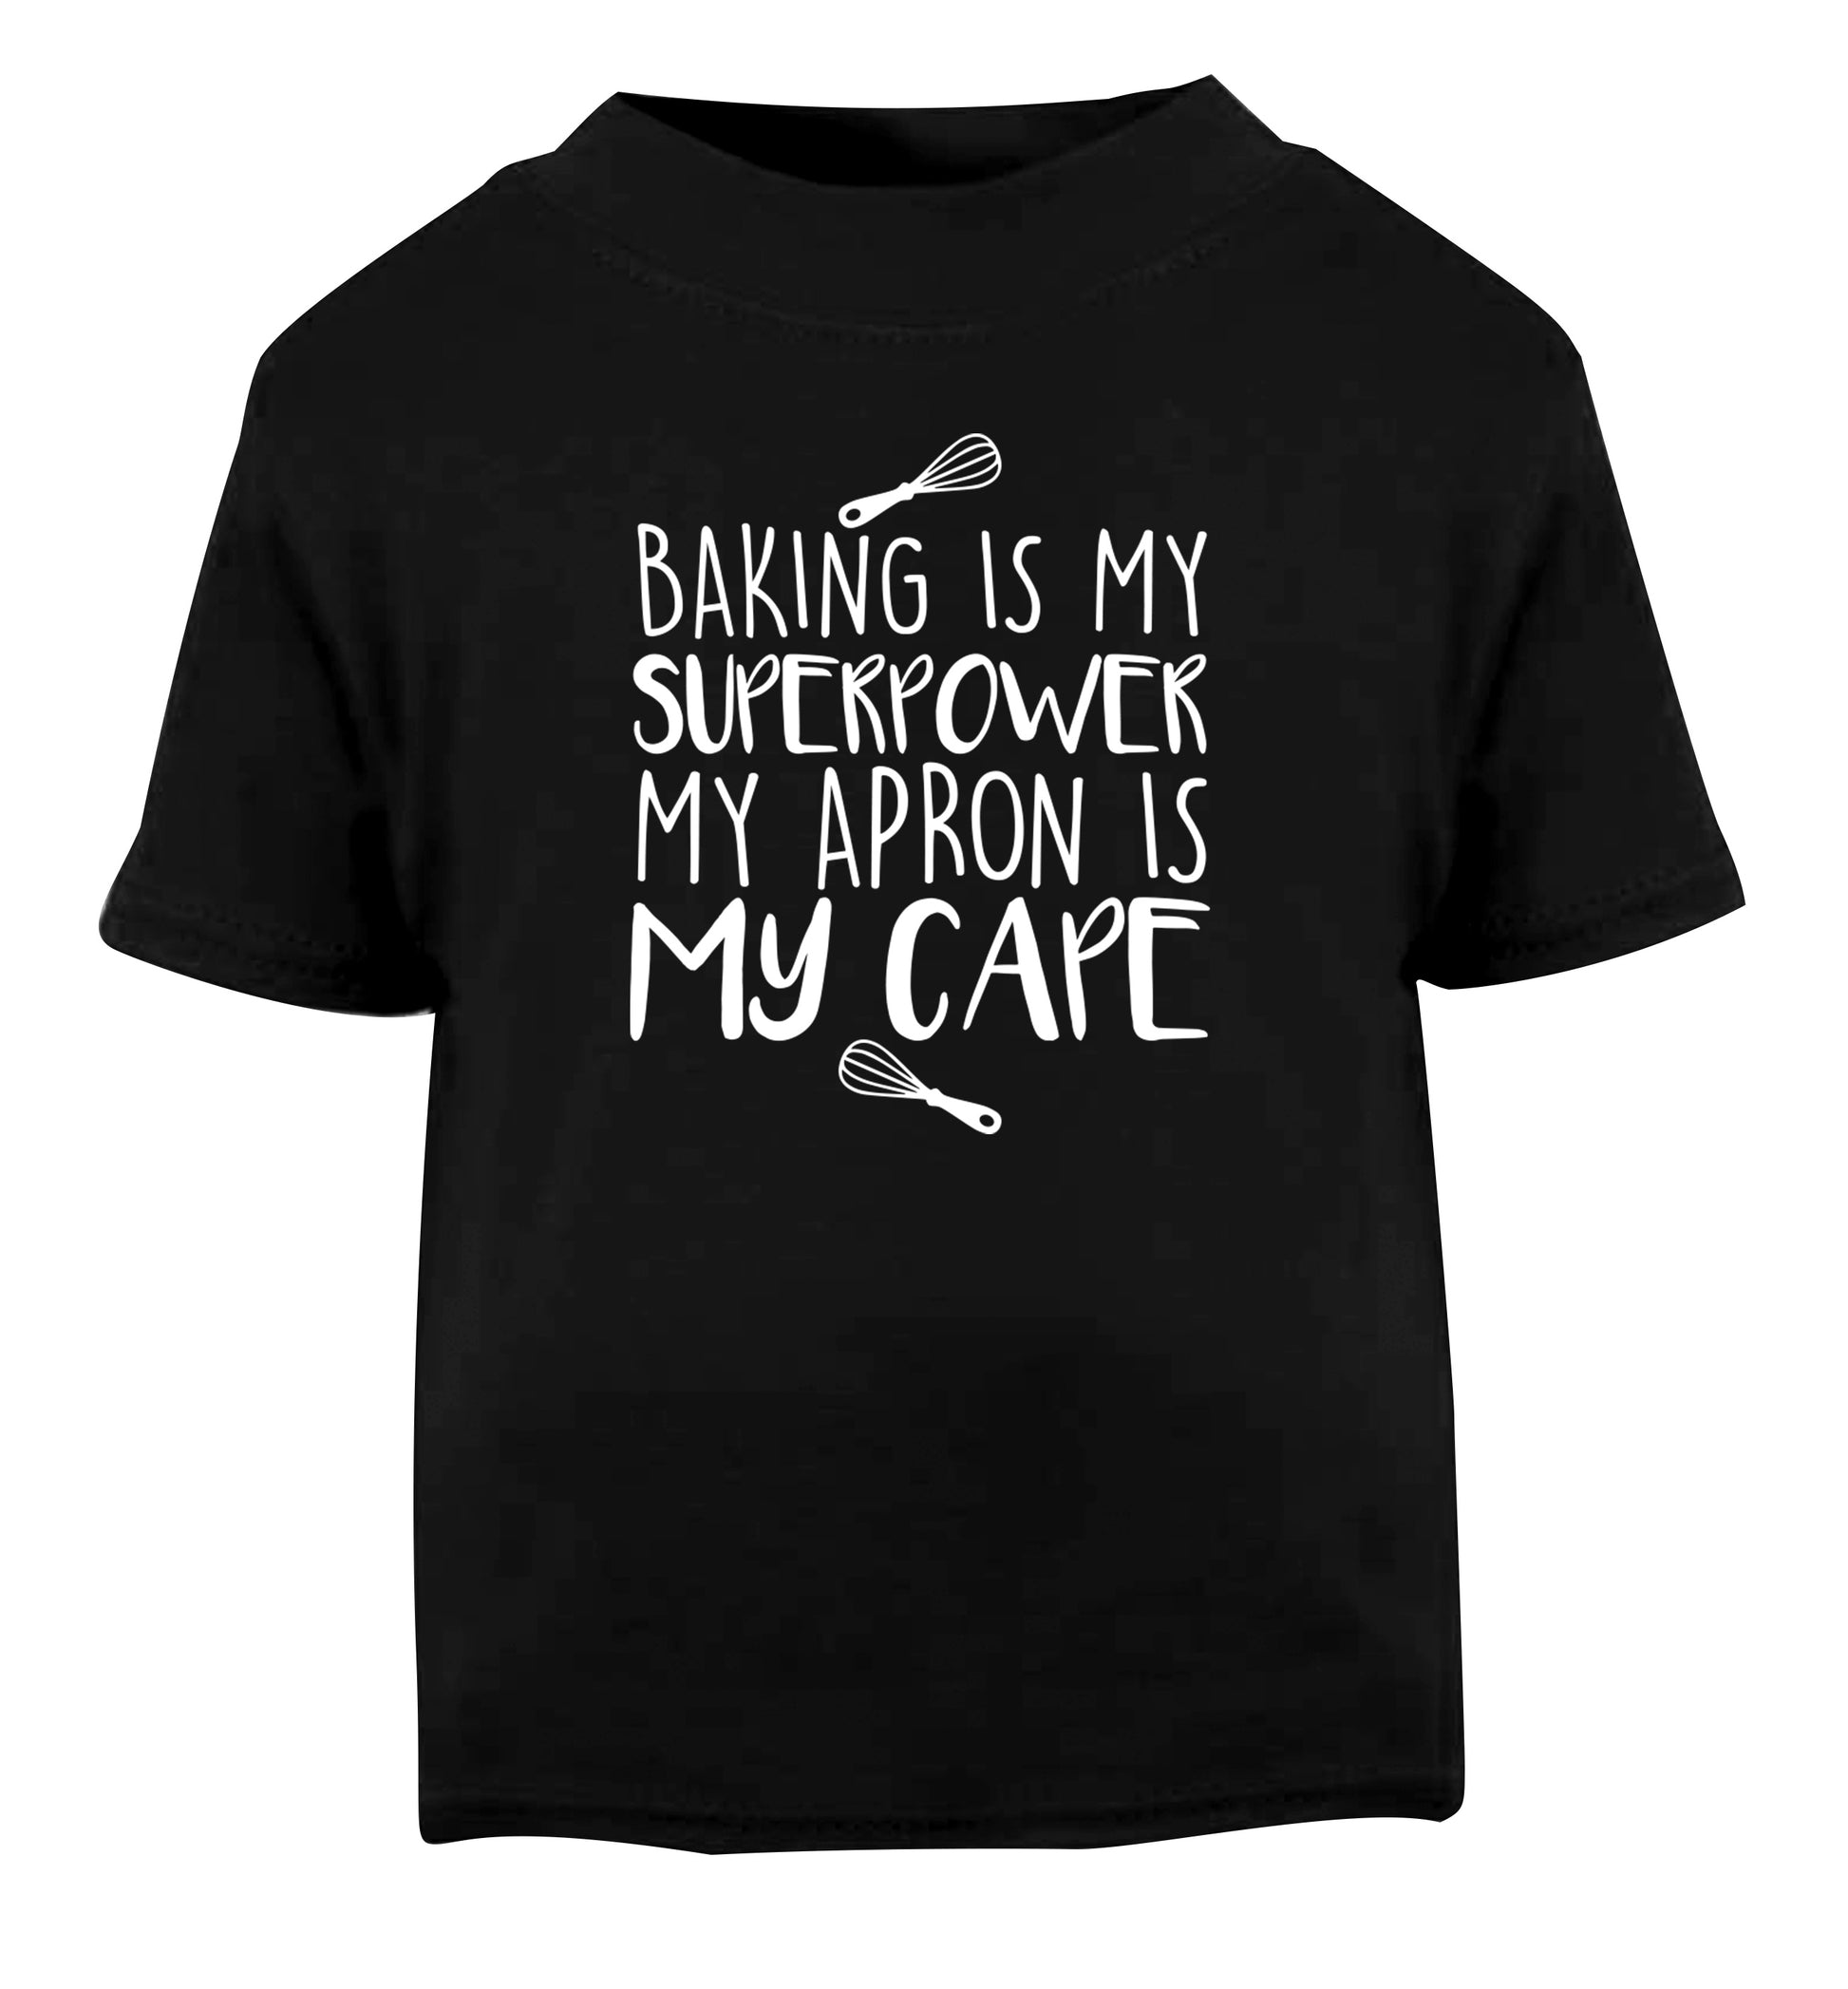 Baking is my superpower my apron is my cape Black Baby Toddler Tshirt 2 years